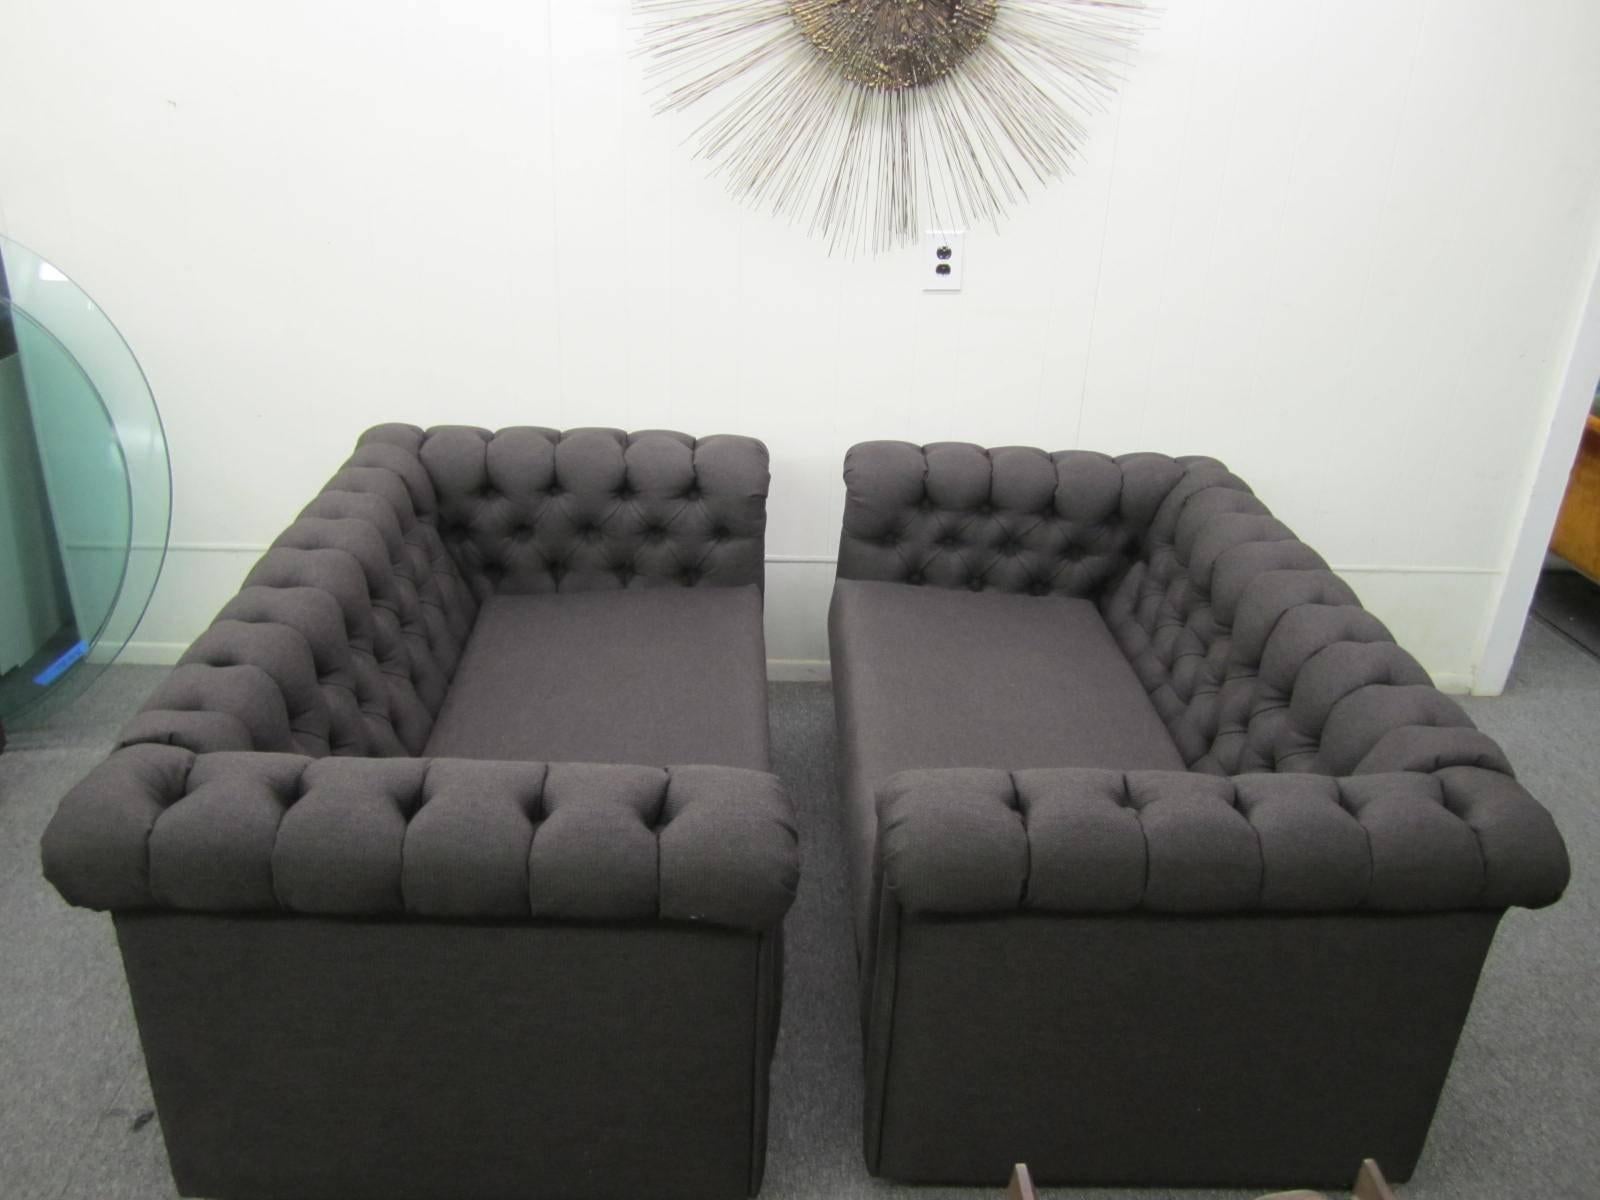 Stylish pair of Harvey Probber style Chesterfield loveseat sofas. Both have newer charcoal black woven fabric in very nice condition. Castors on the underside make moving them around a snap. This pair is ready to slip right into your Mid-Century